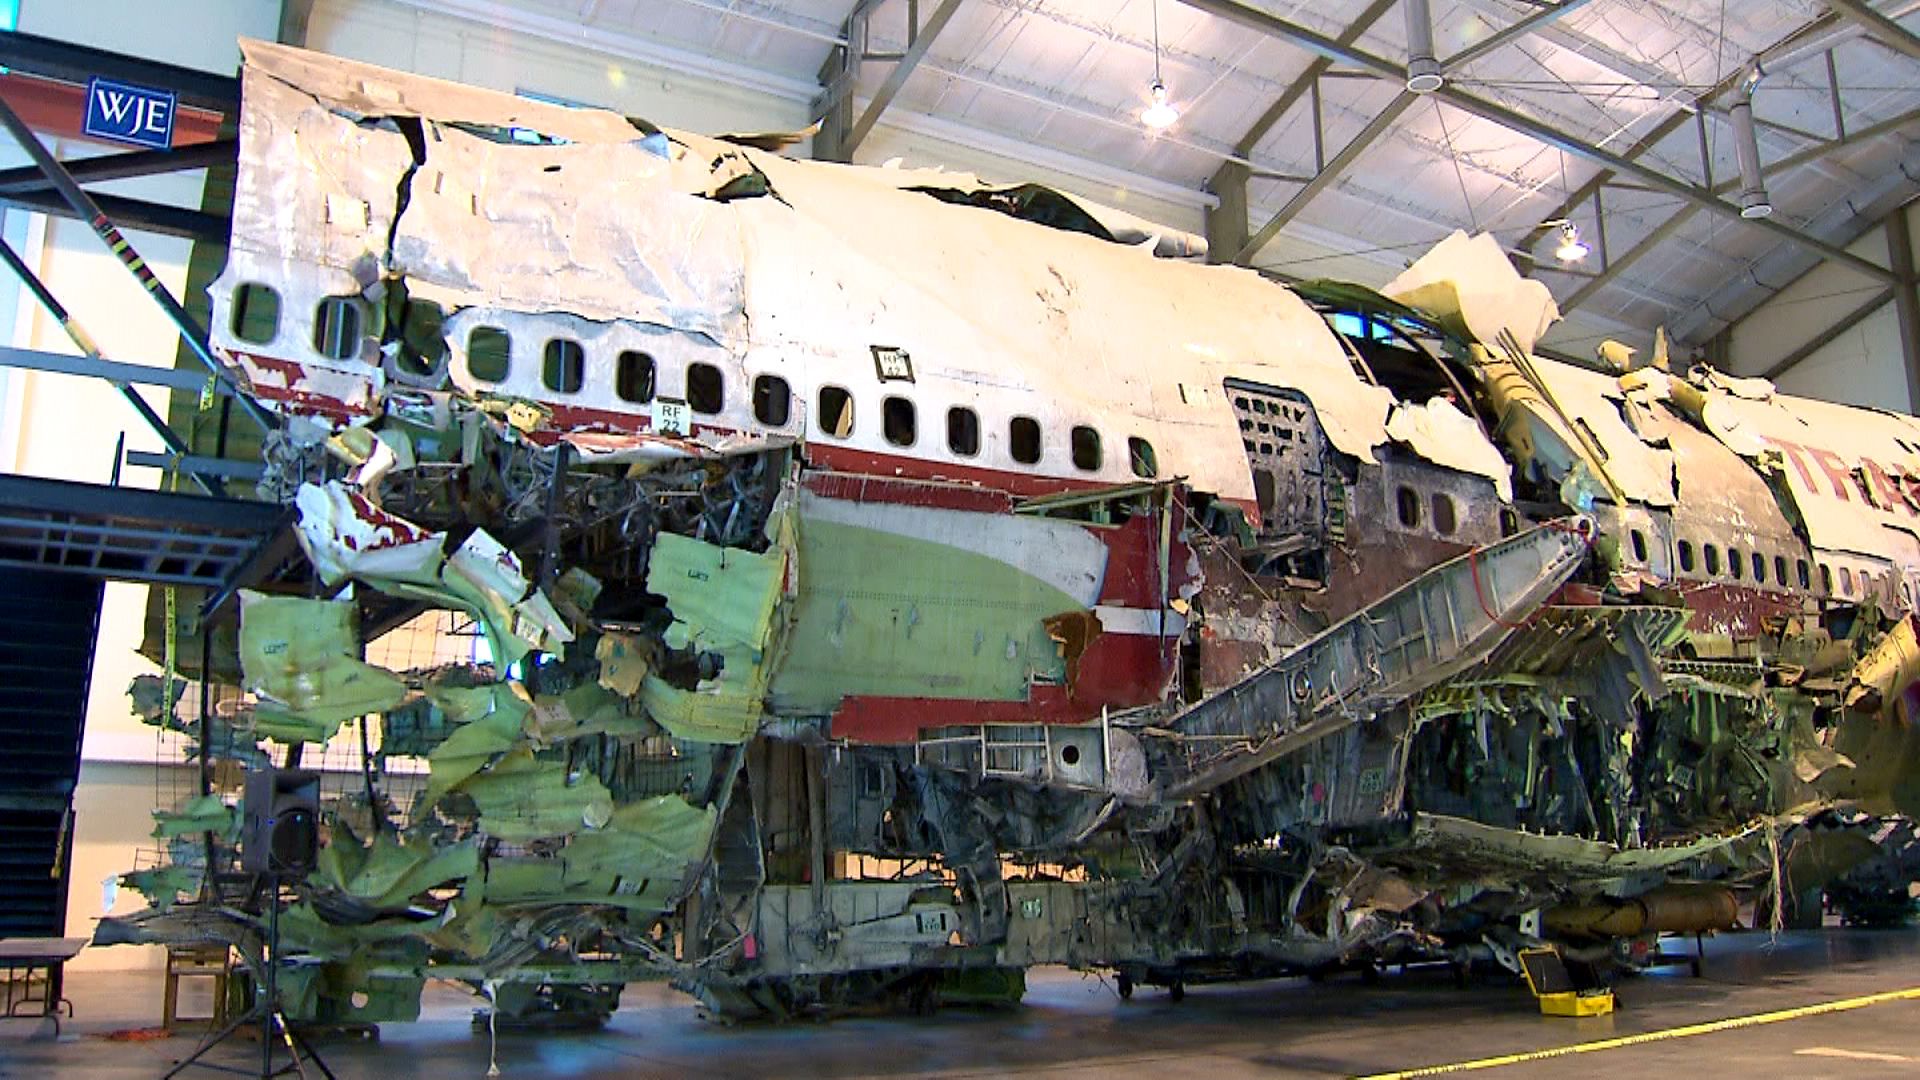 NTSB's TWA Flight 800 Reconstruction to be Decommissioned